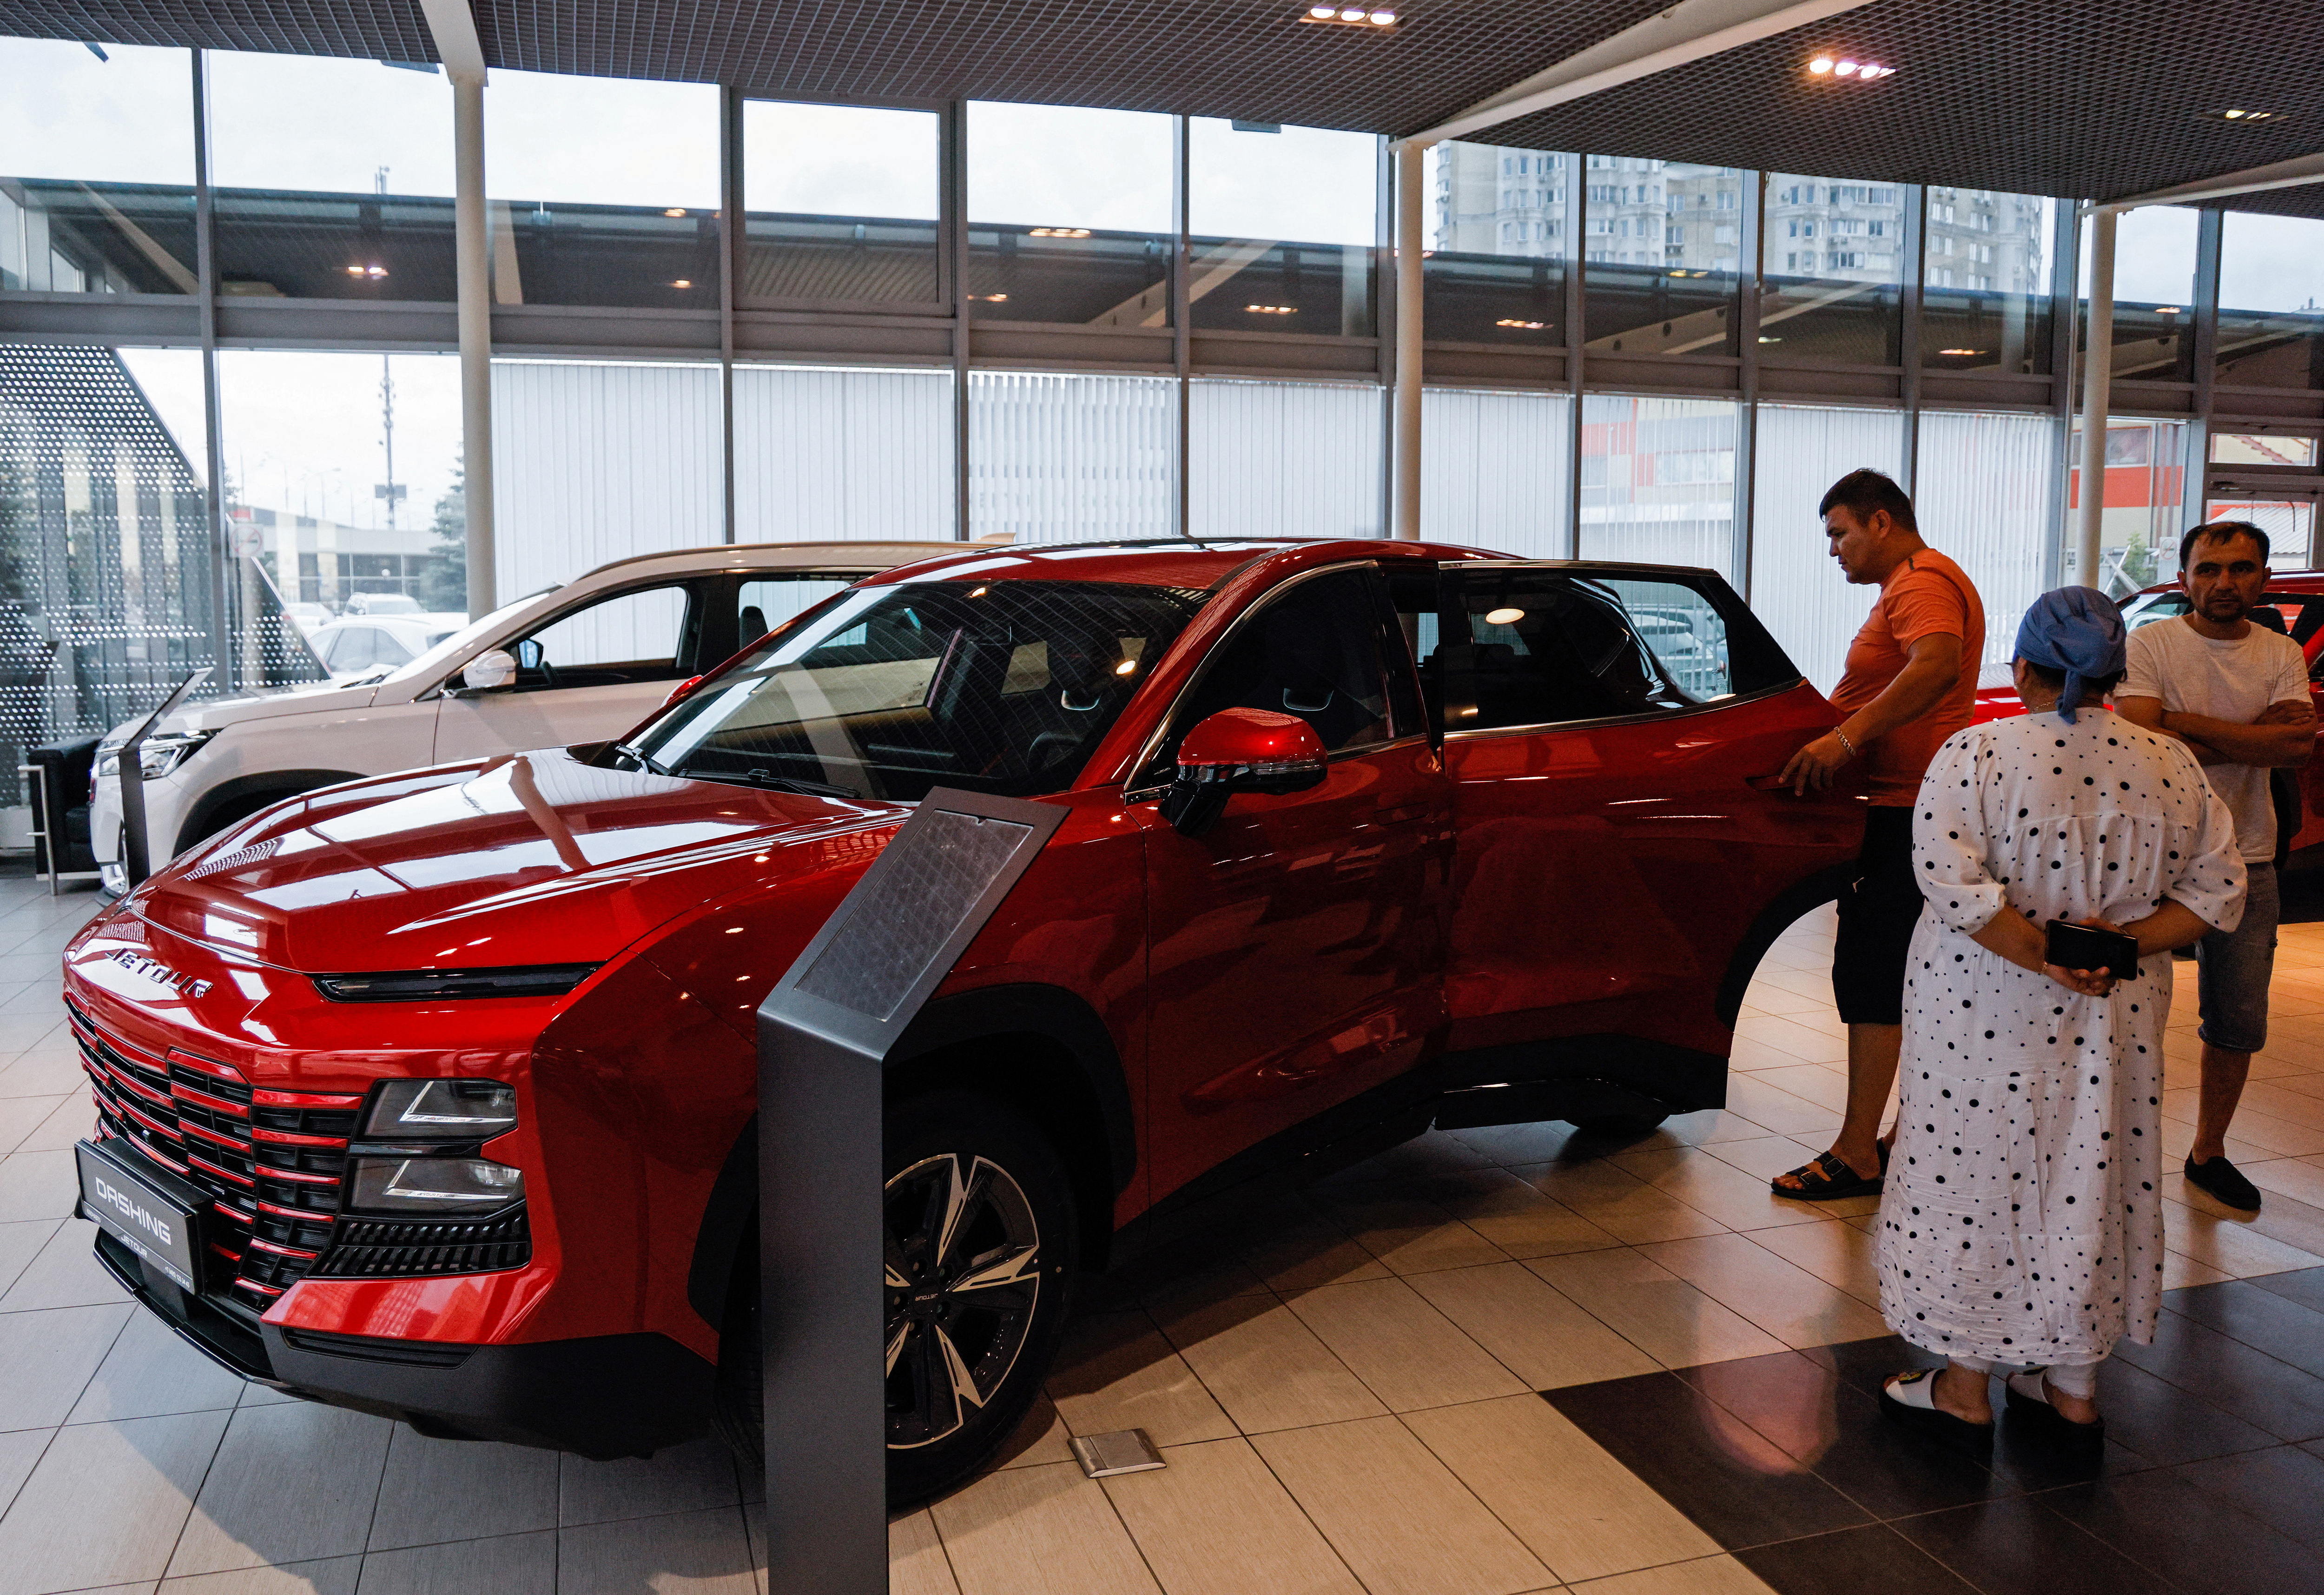 People inspect a Jetour Dashing crossover at a dealership in Lyubertsy